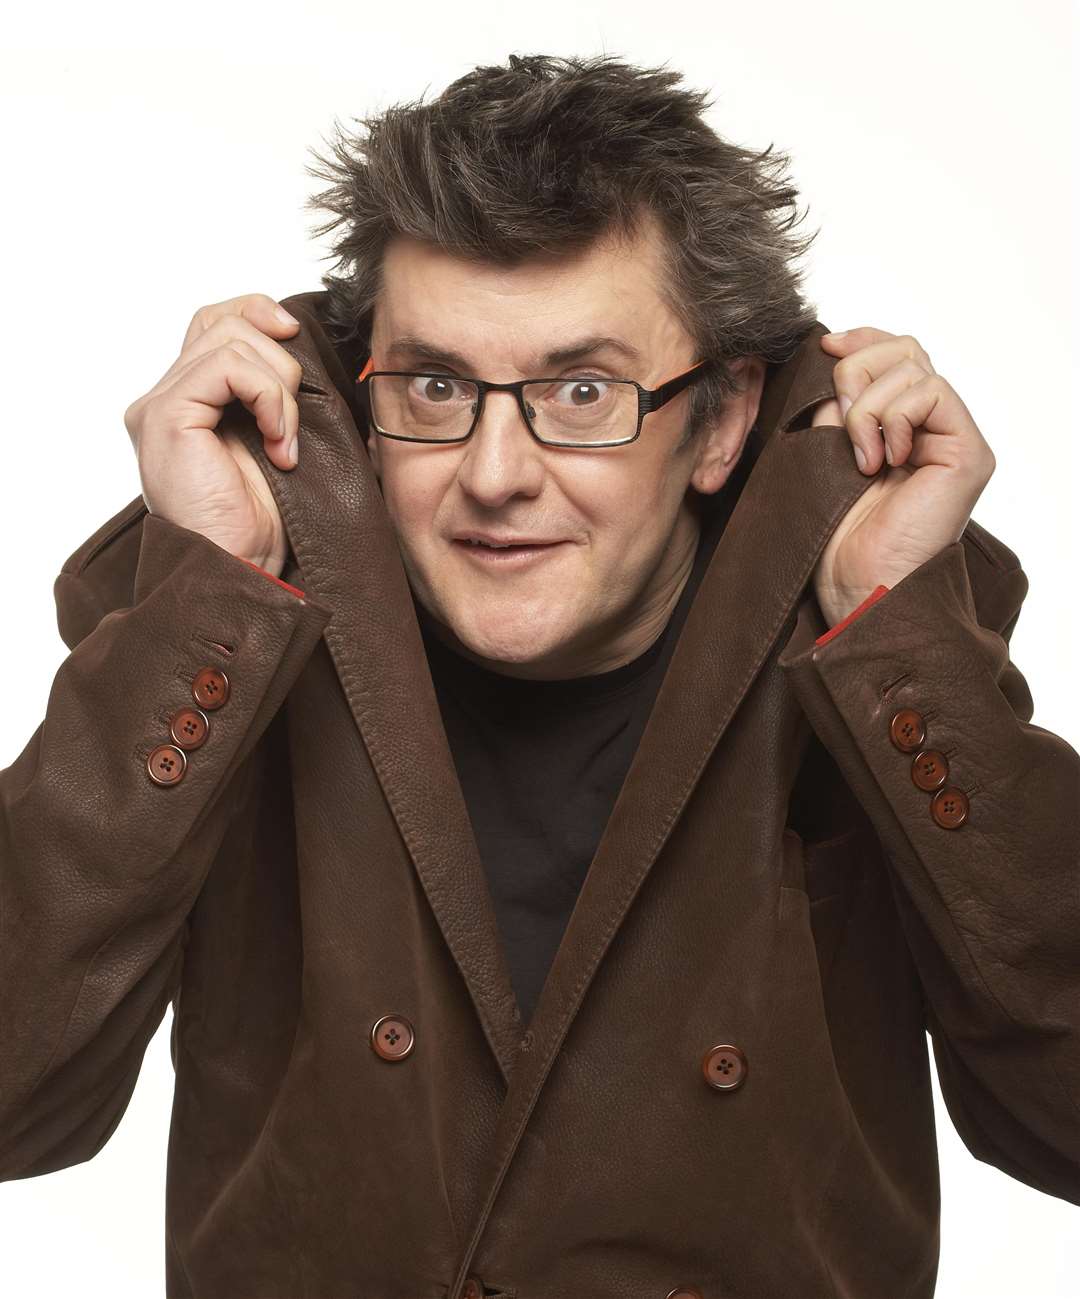 Joe Pasquale's latest tour is A Few of His Favourite Things